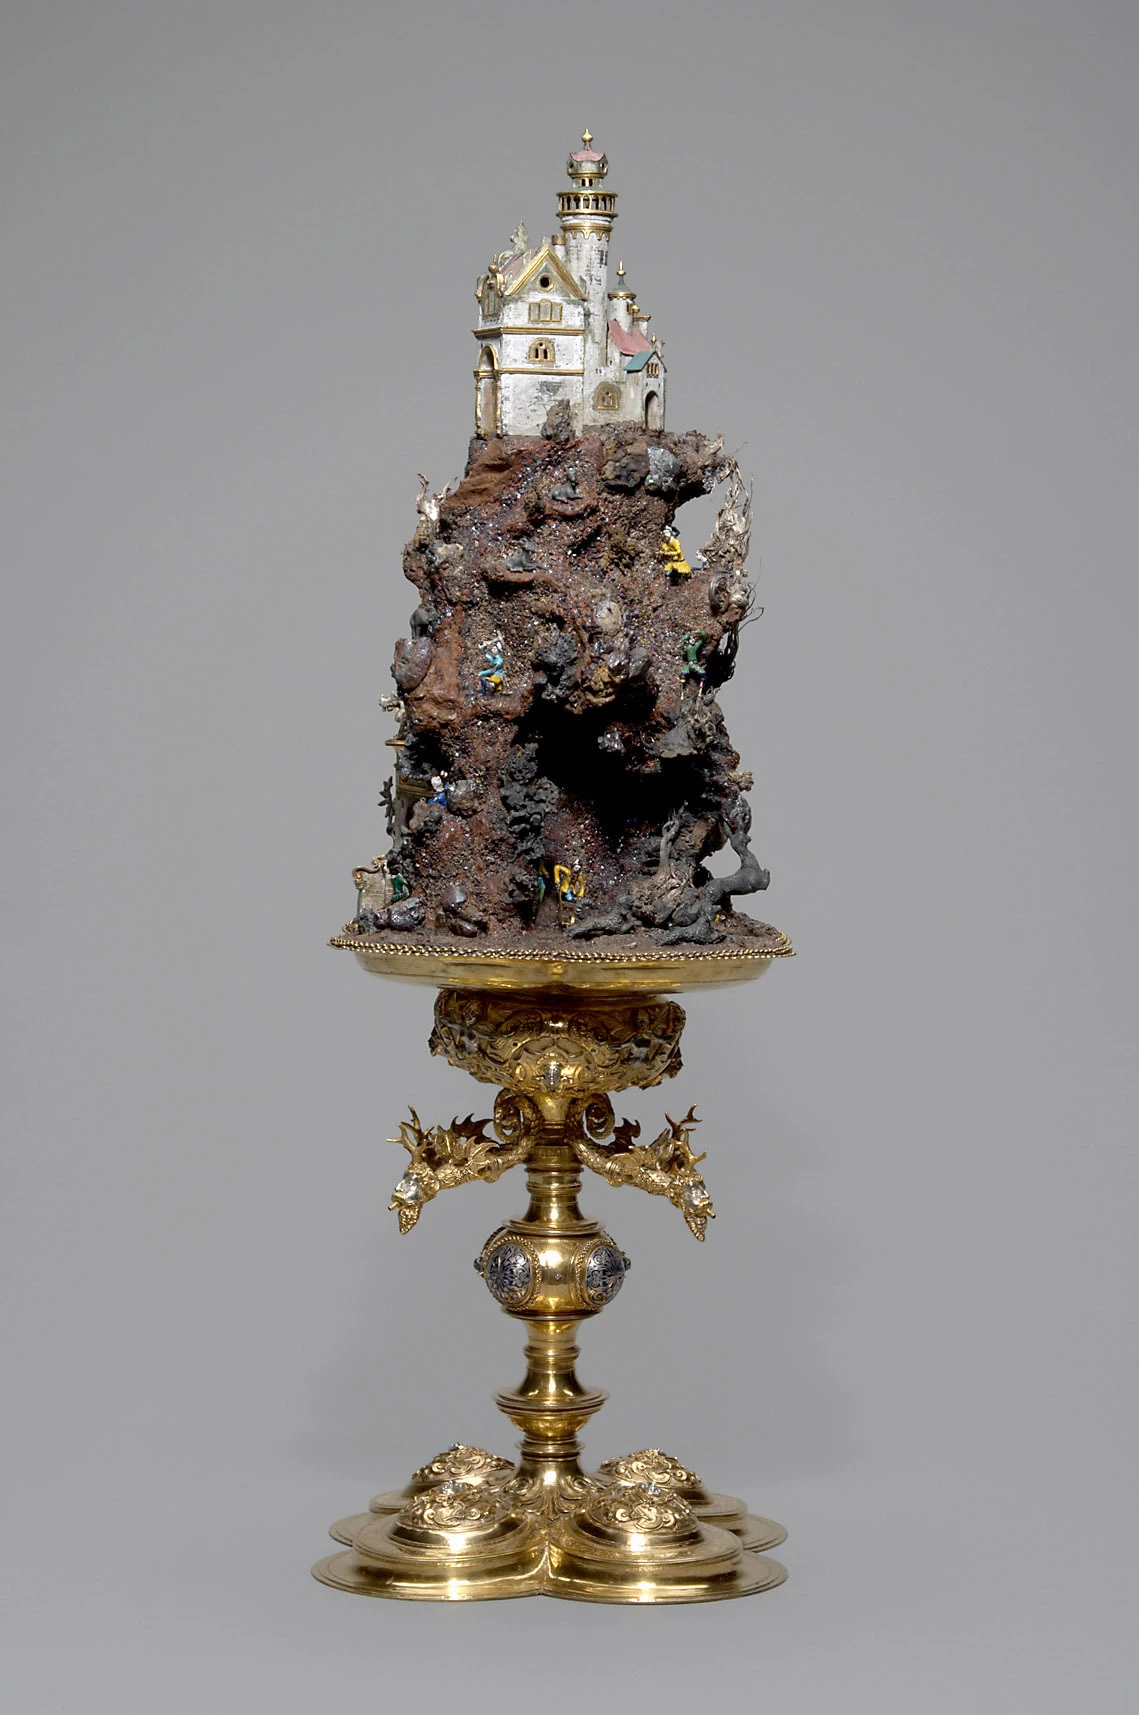 Caspar Ulich, handstein in the form of a table fountain with David and Bathsheba, 3rd quarter 16th century, 60.5 cm high, Kunsthistorisches Museum Wien, Kunstkammer. ©KHM-Museumsverband.-圖片